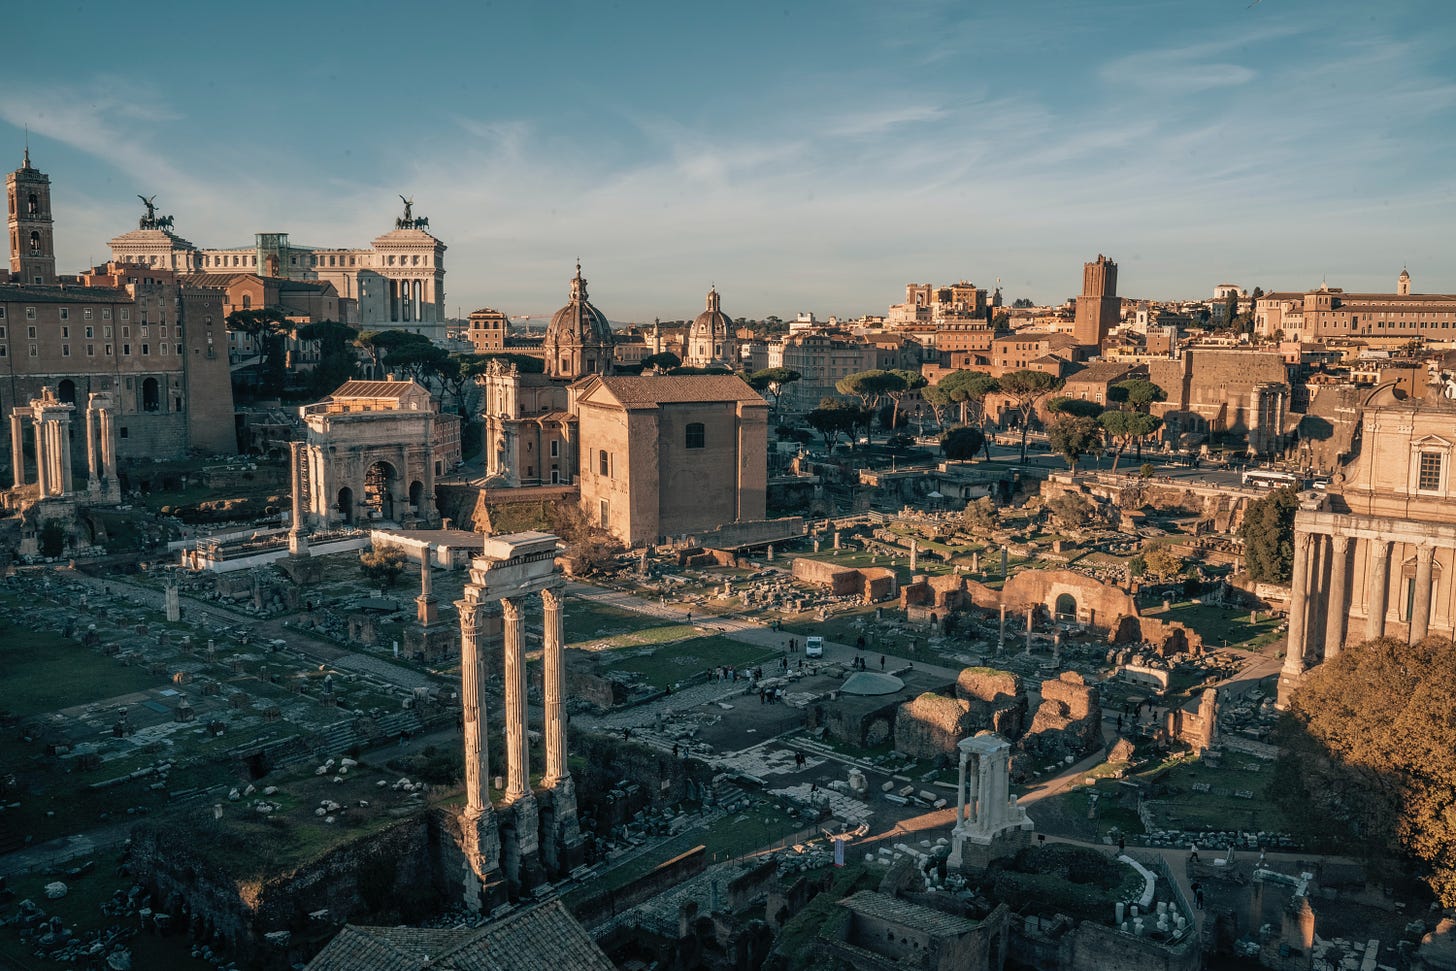 A panorama of ruined buildings in the Roman Forum against a blue and white sky